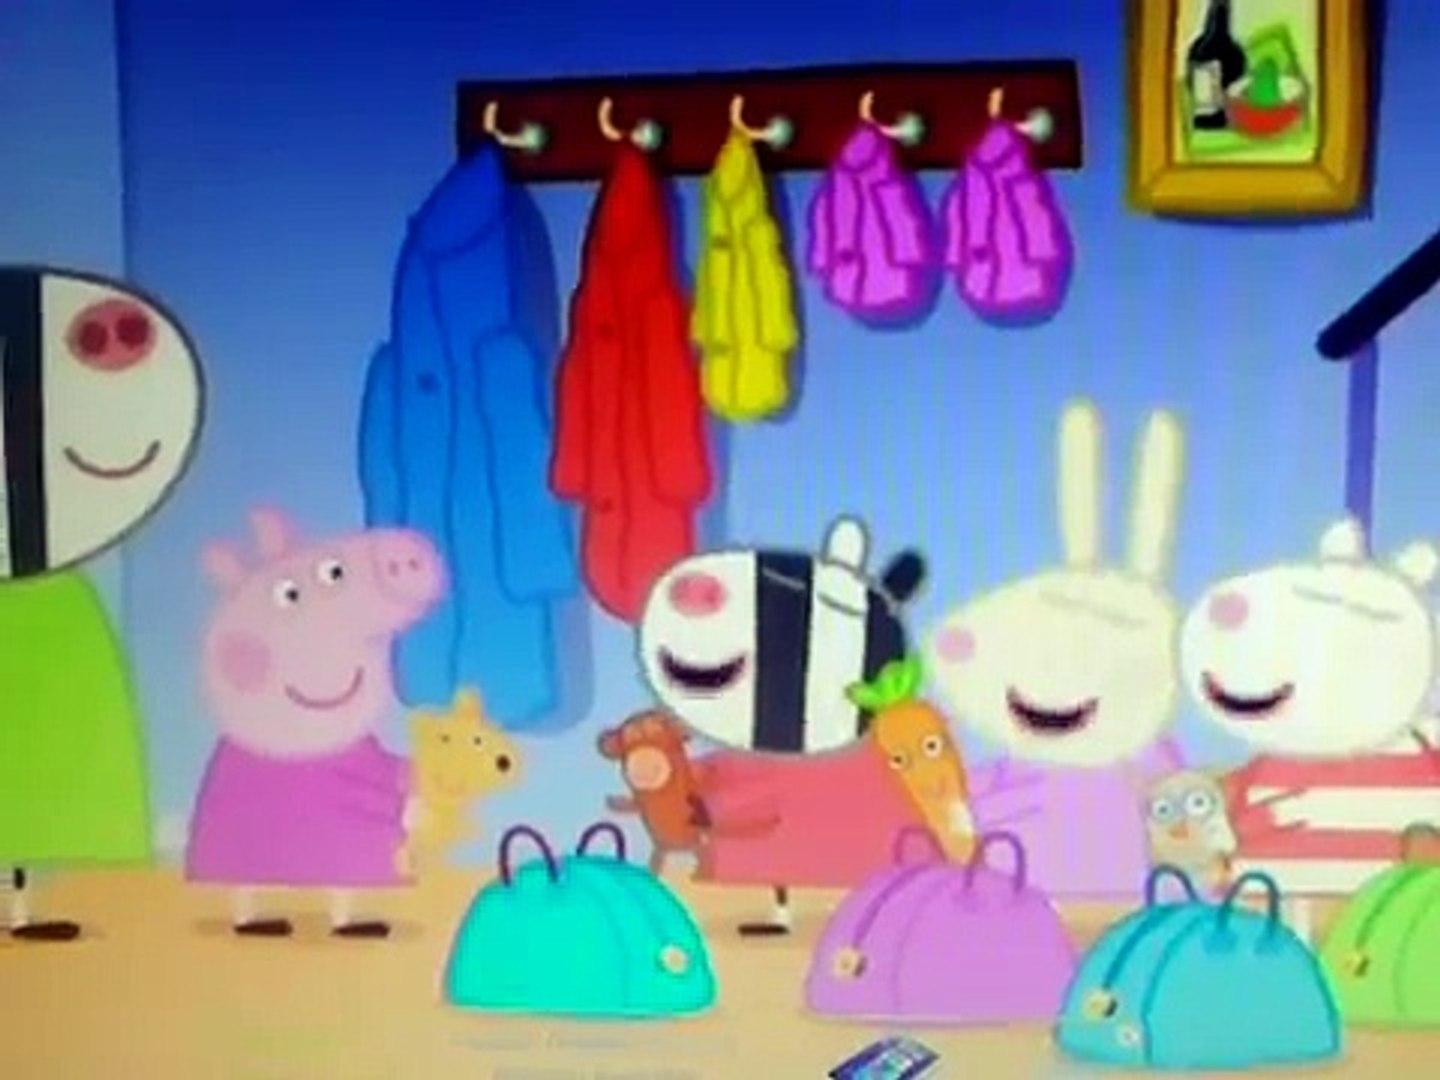 Peppa Pig S02e51 Il pigiama party - video Dailymotion